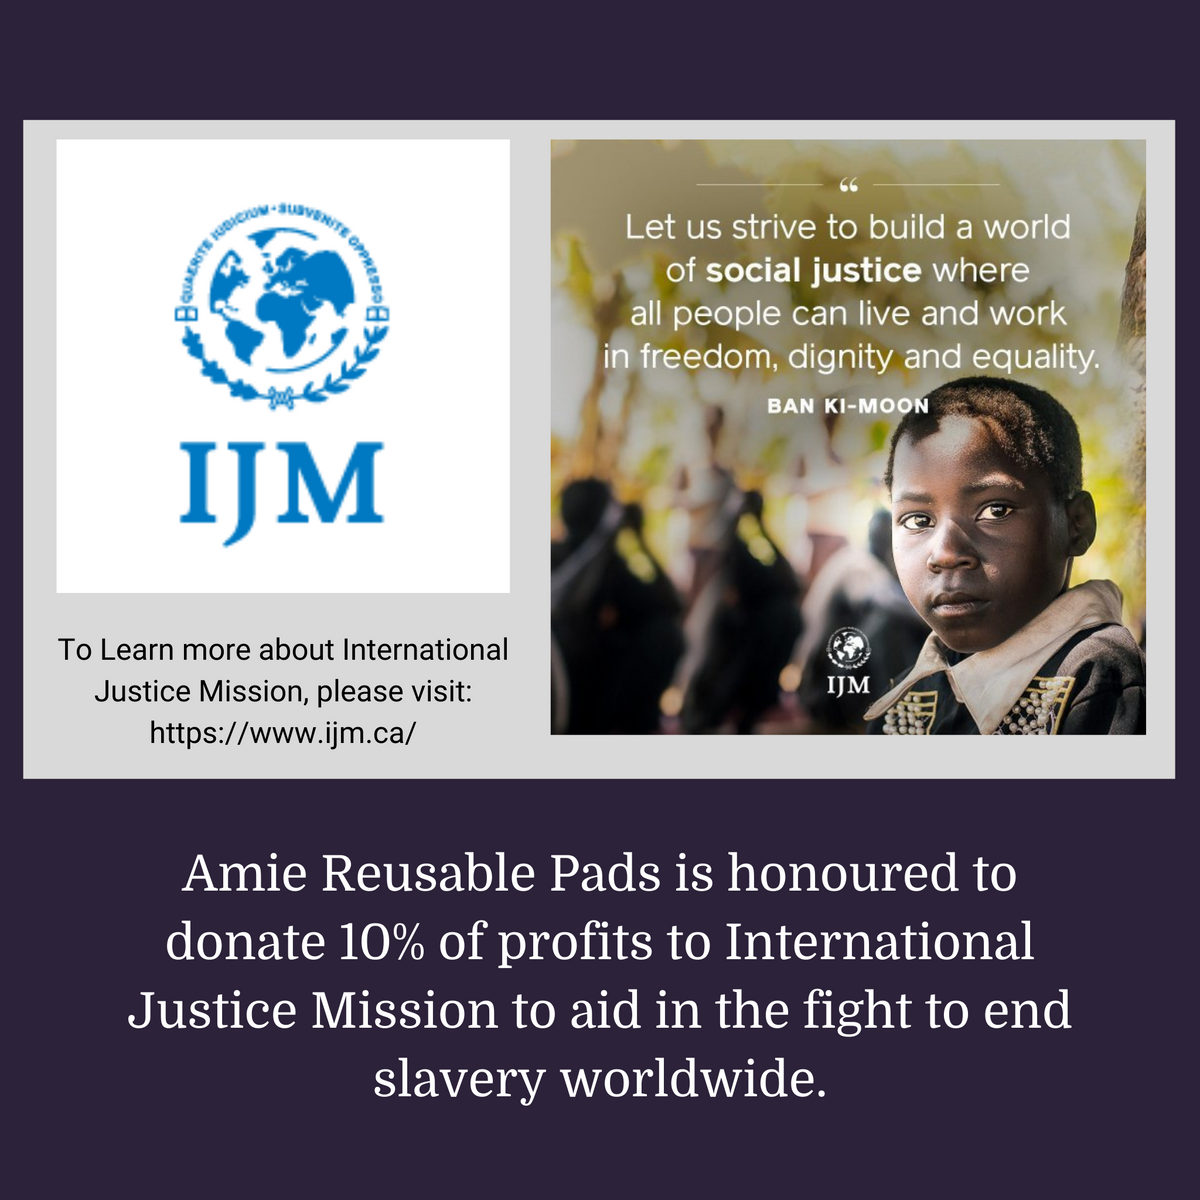 graphic of child and link to international justice mission amie reusable pads is honoured to donate 10% of profits to international justice mission to aid in the fight to end slavery worldwide